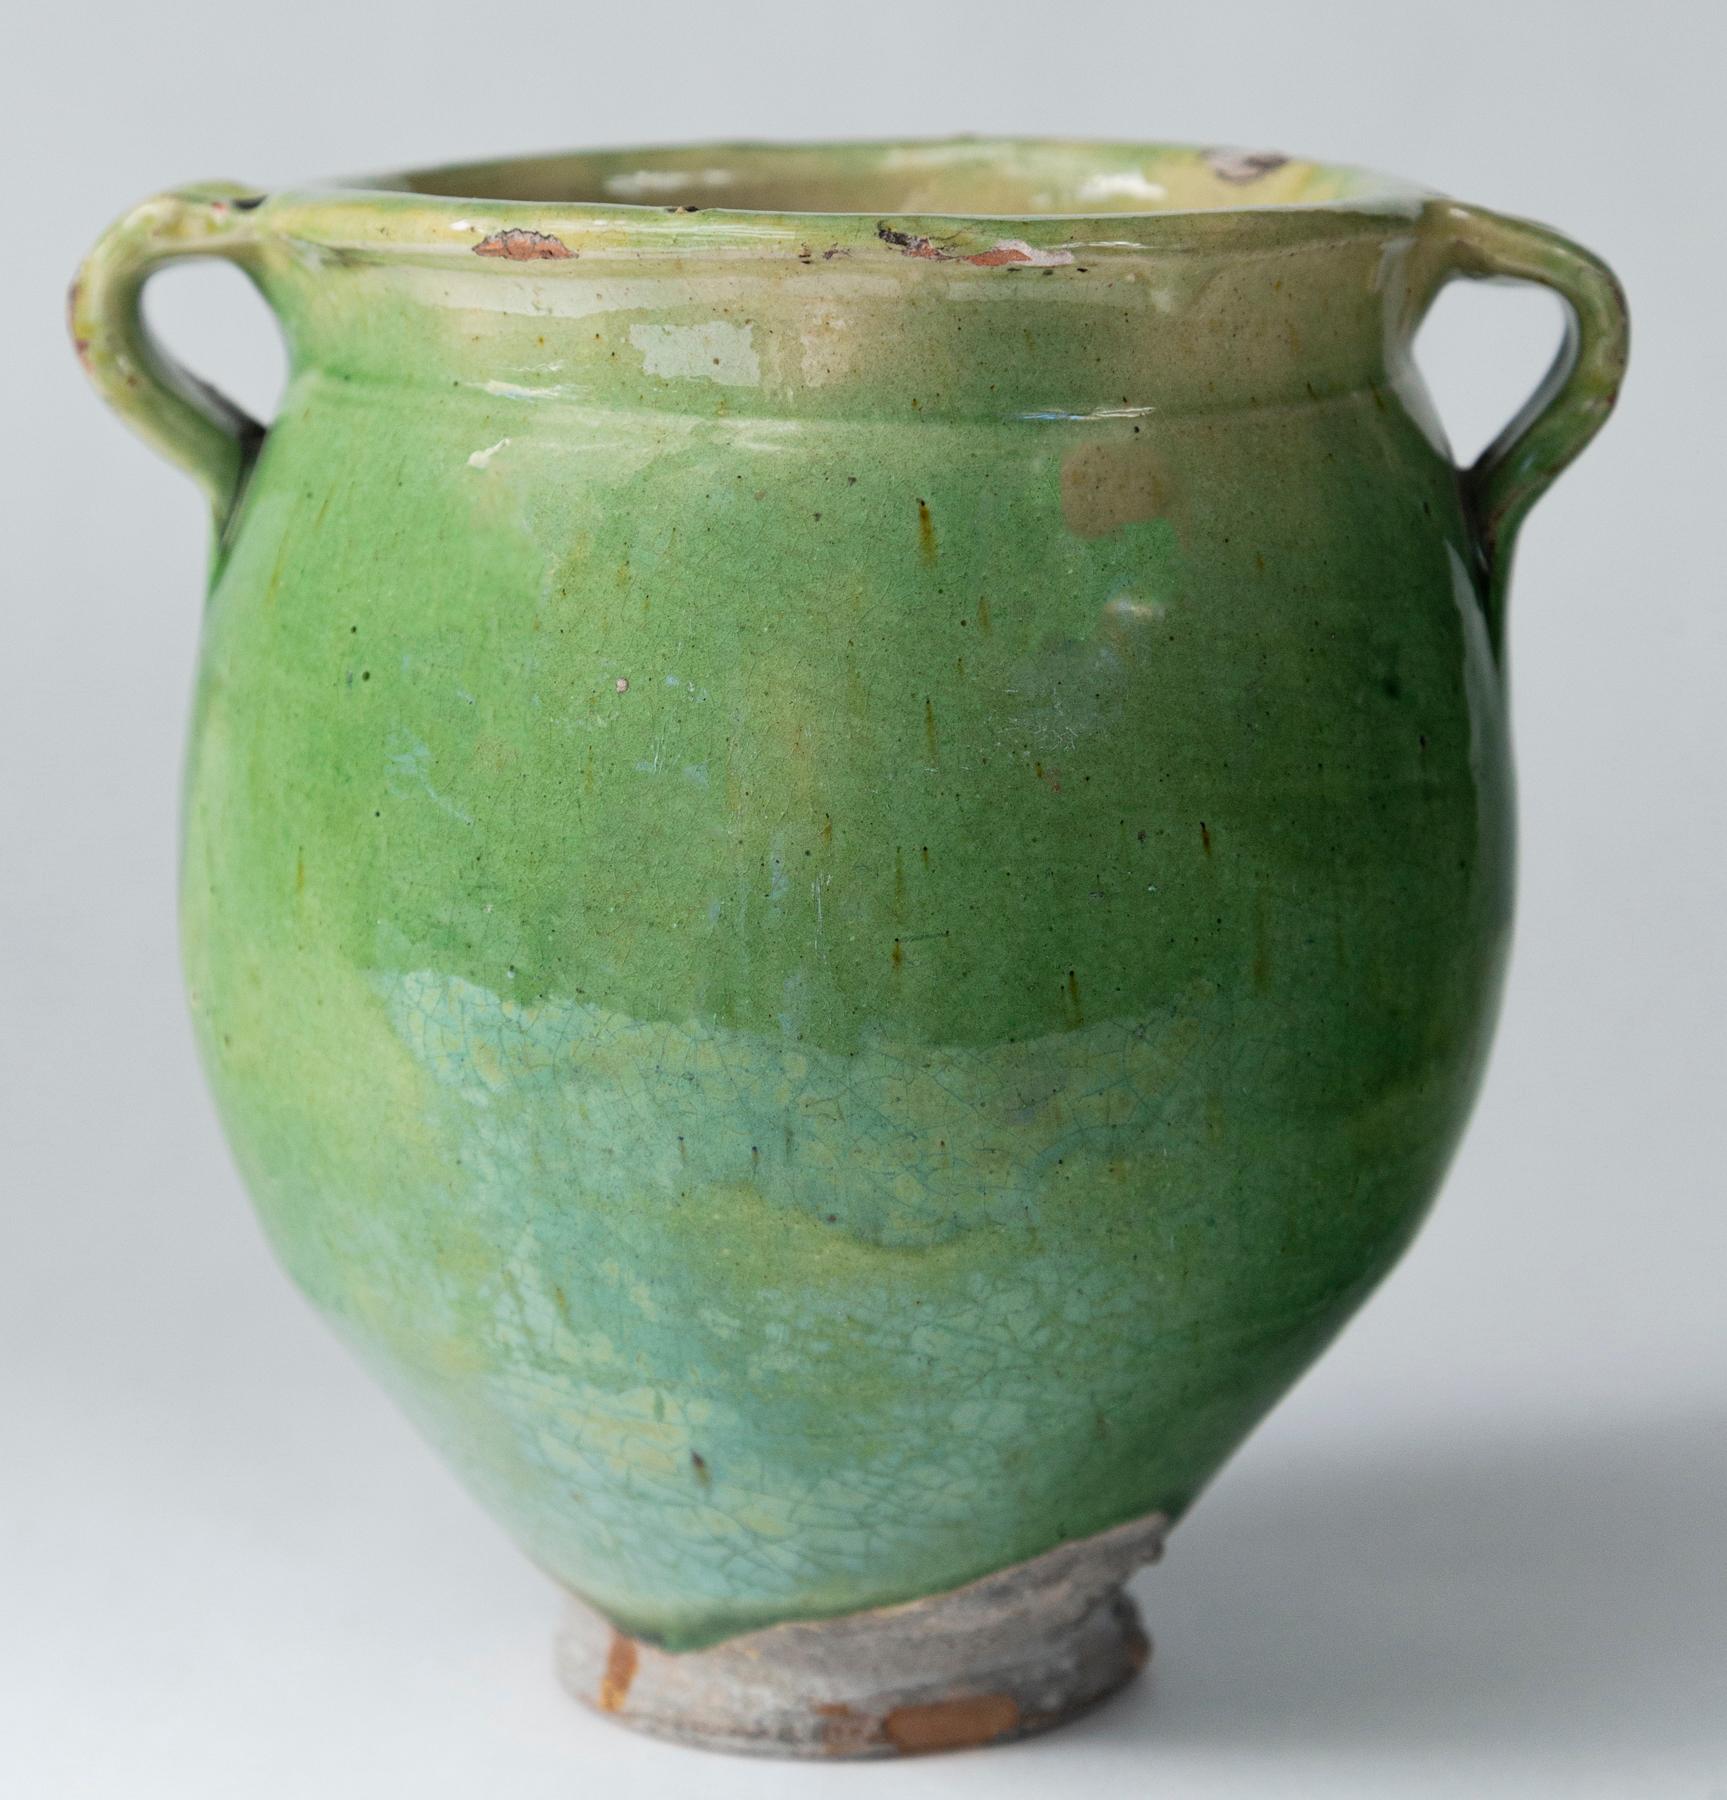 Green Glazed pottery storage jar, France, Early 20th Century. Multi-hued green glazed jar from the South of France.